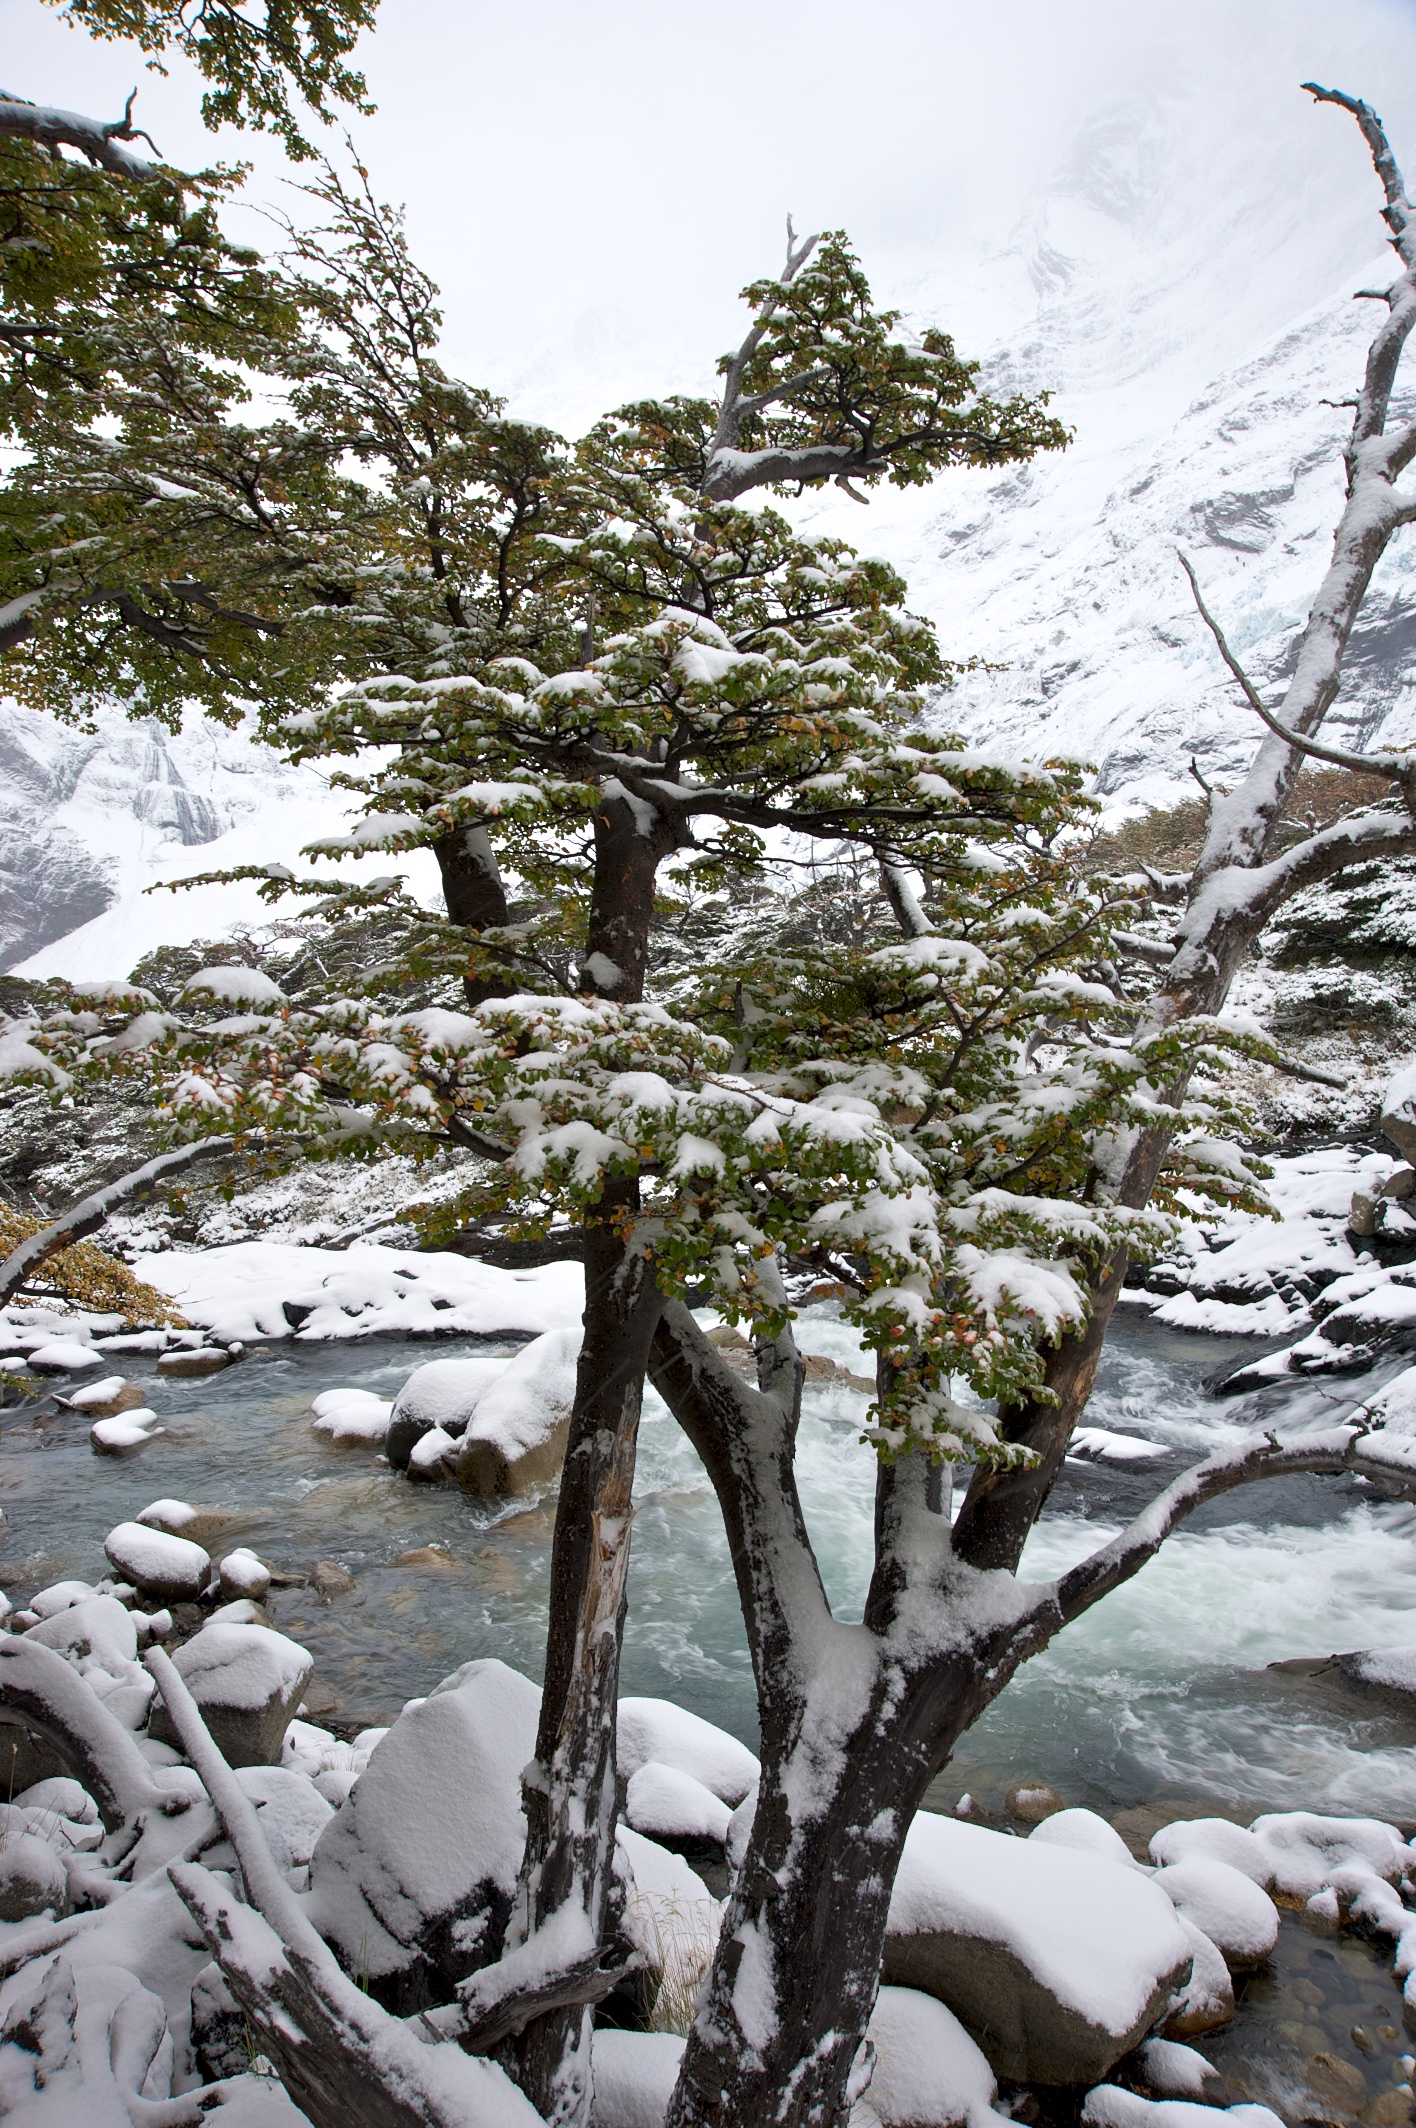  Trees in snow, Torres del Paine, Patagonia, Chile 